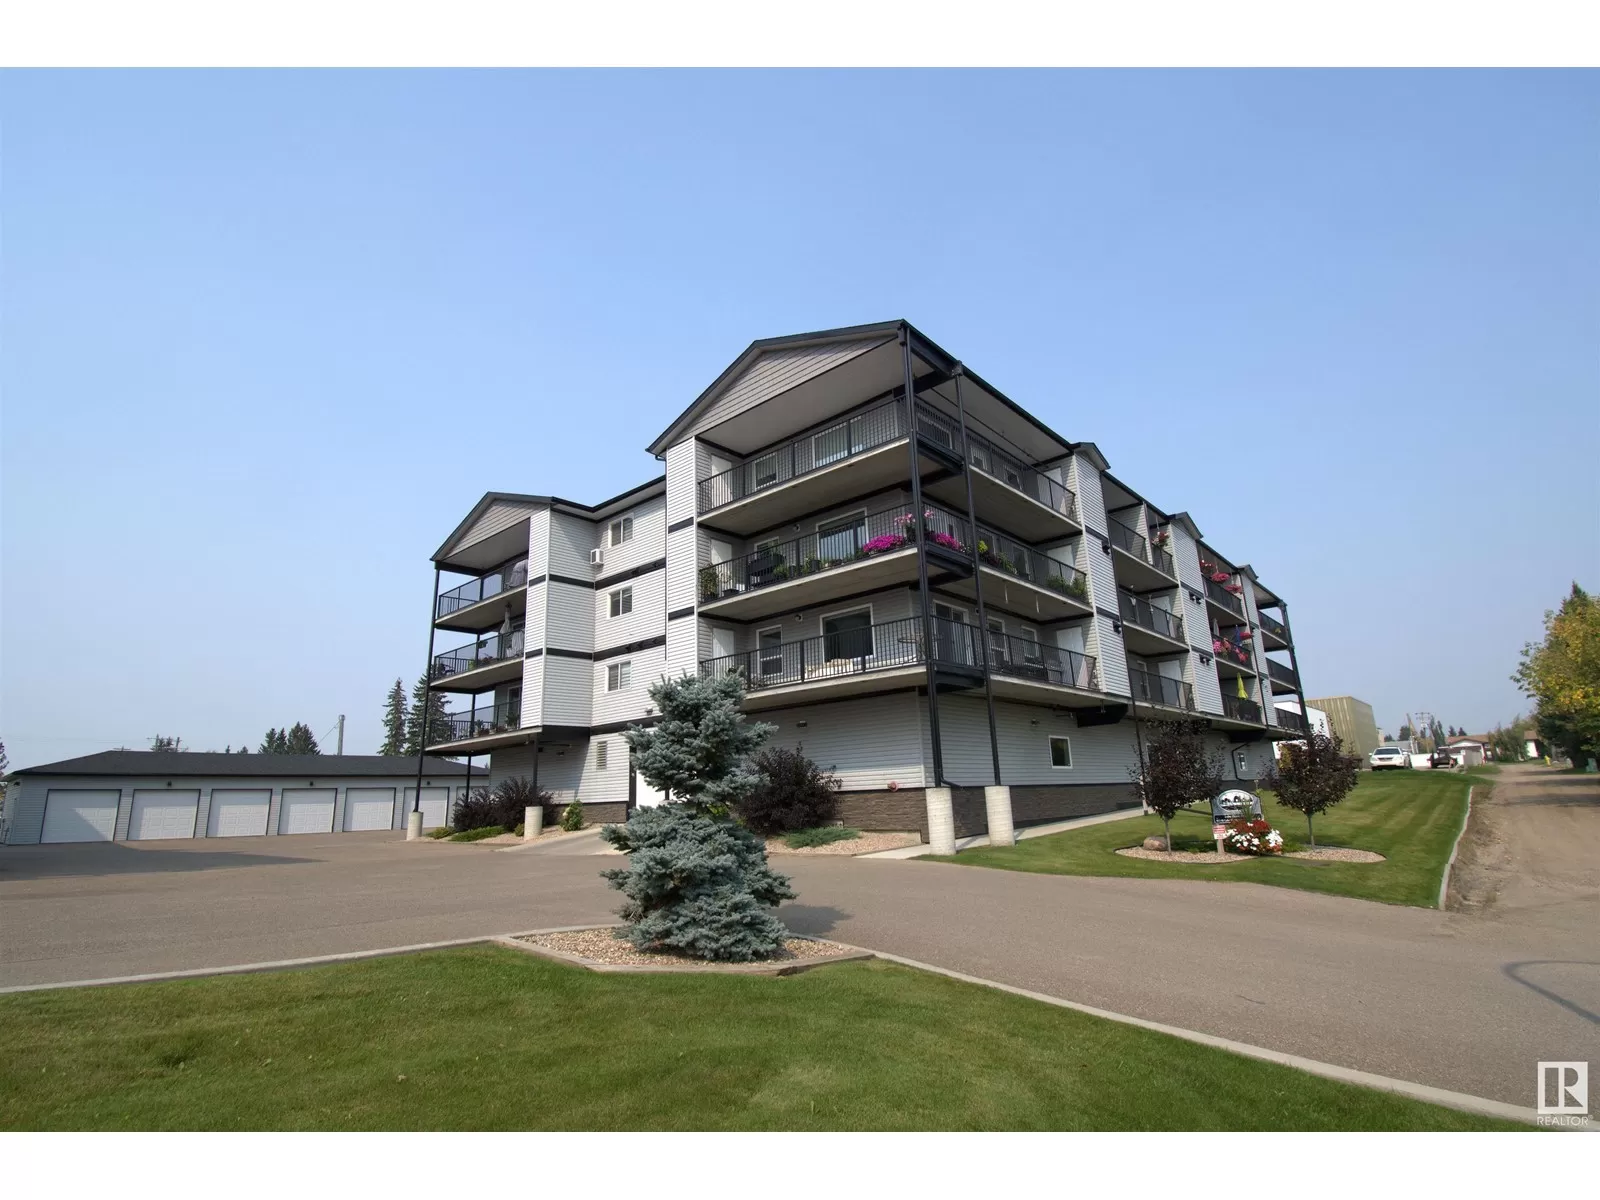 Apartment for rent: #303 4614b Lakeshore Dr, St. Paul Town, Alberta T0A 3A3